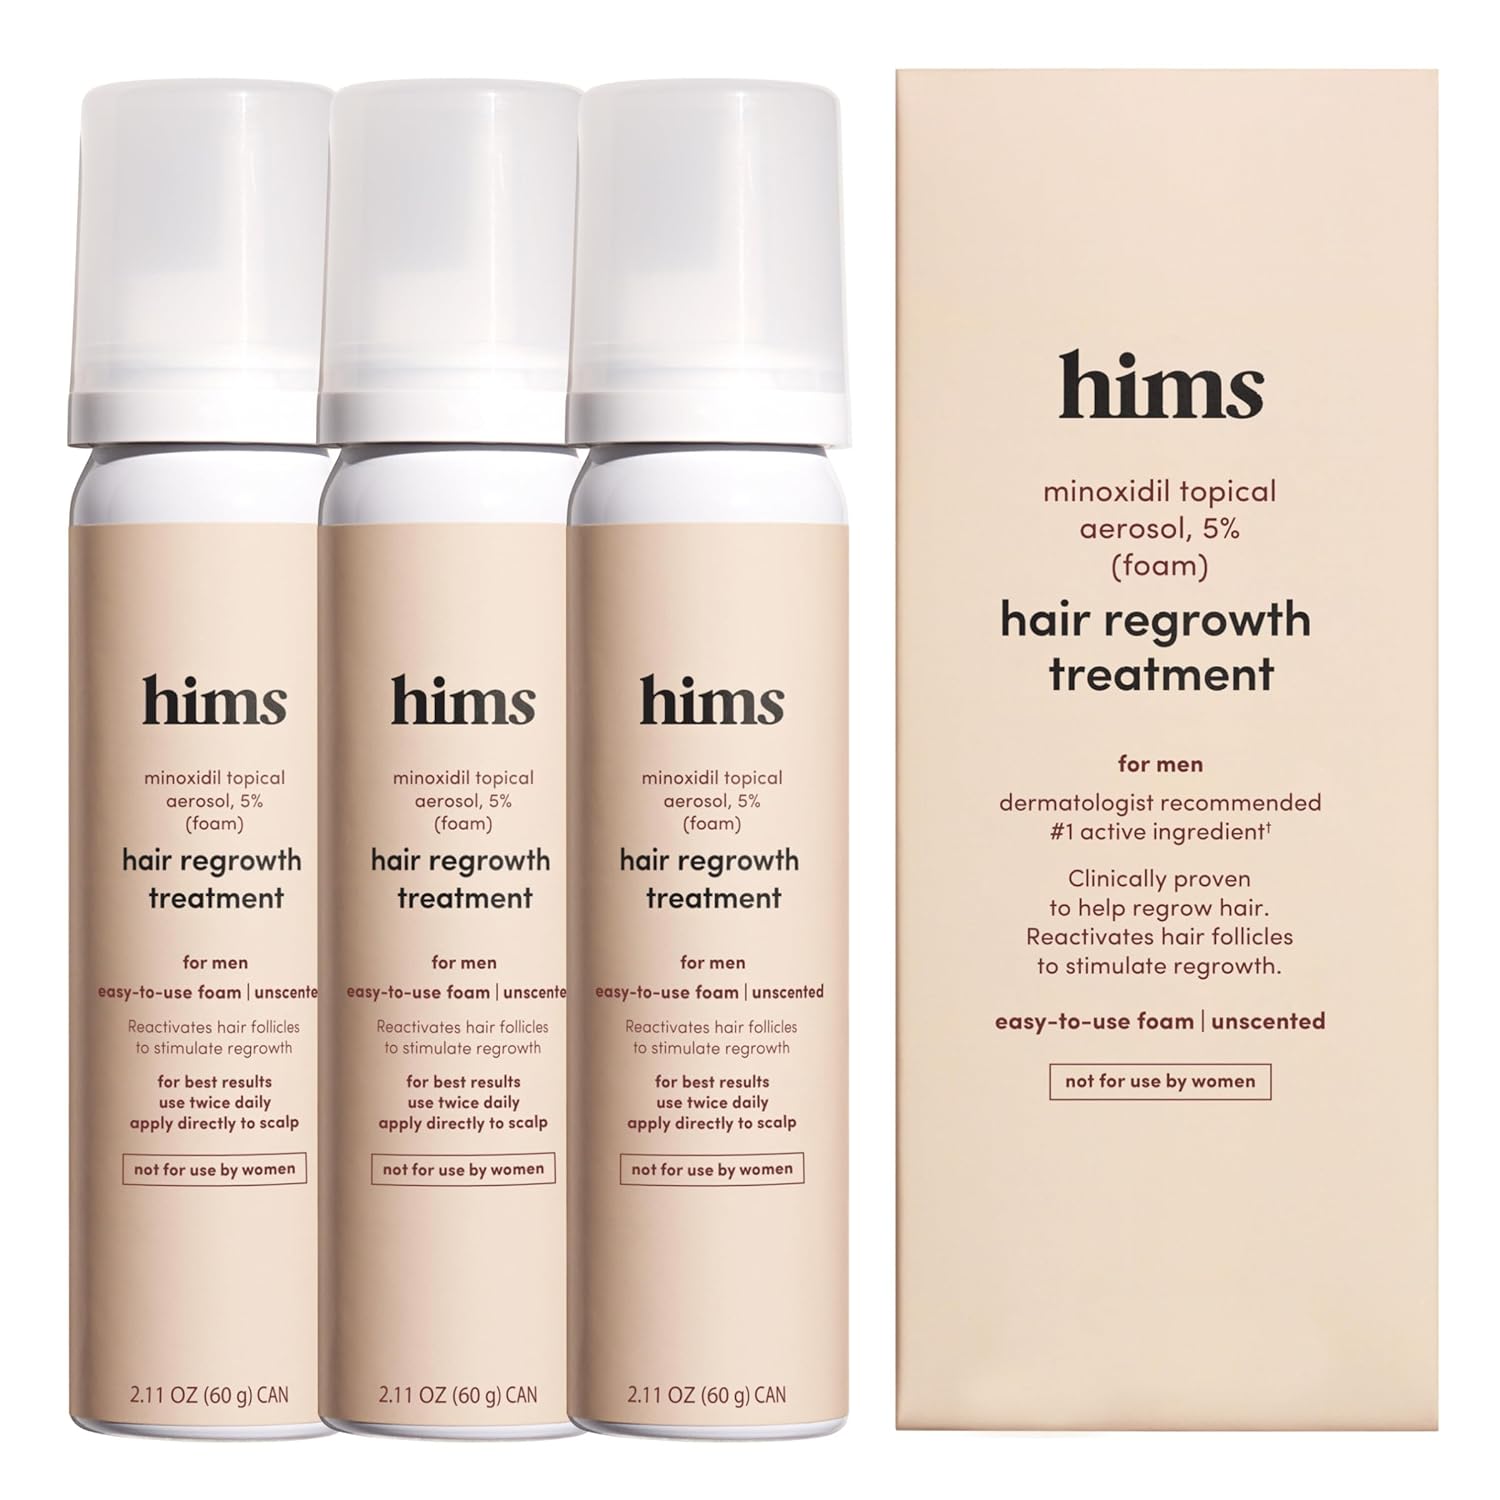 hims Extra Strength Hair Regrowth Treatment for Men wit